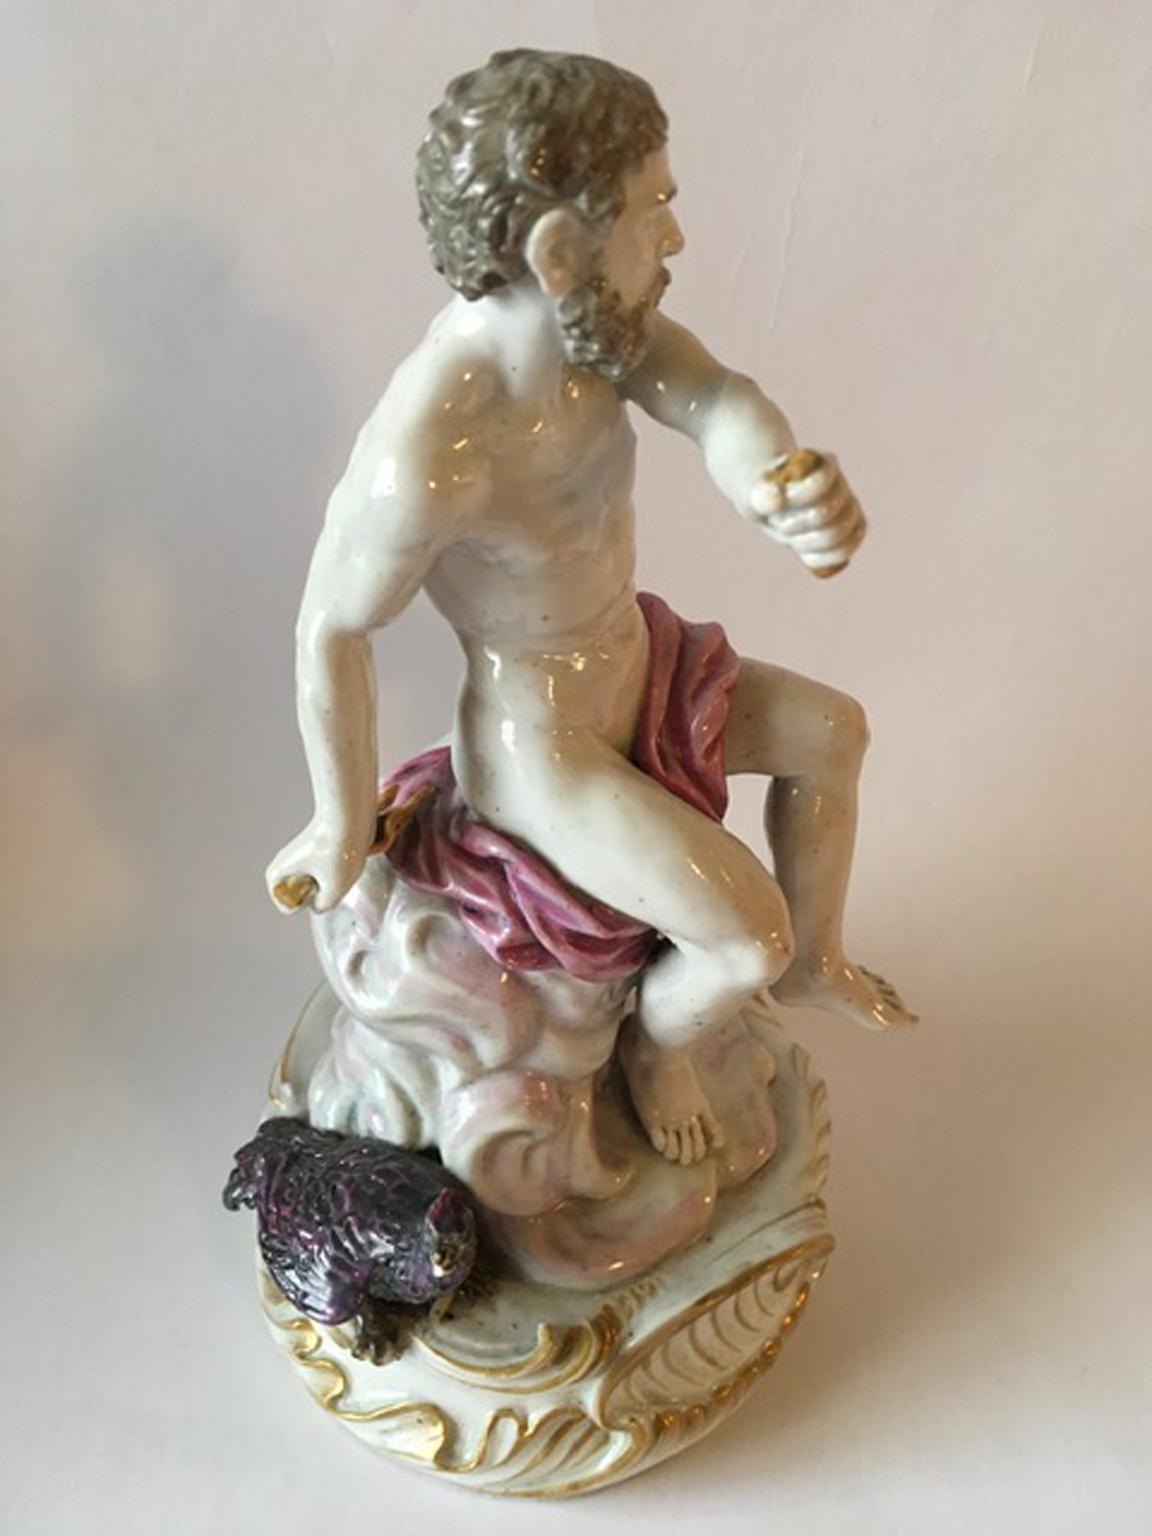 Europe 18th Century Attribuited to Meissen Porcelain Giove Figurine For Sale 2